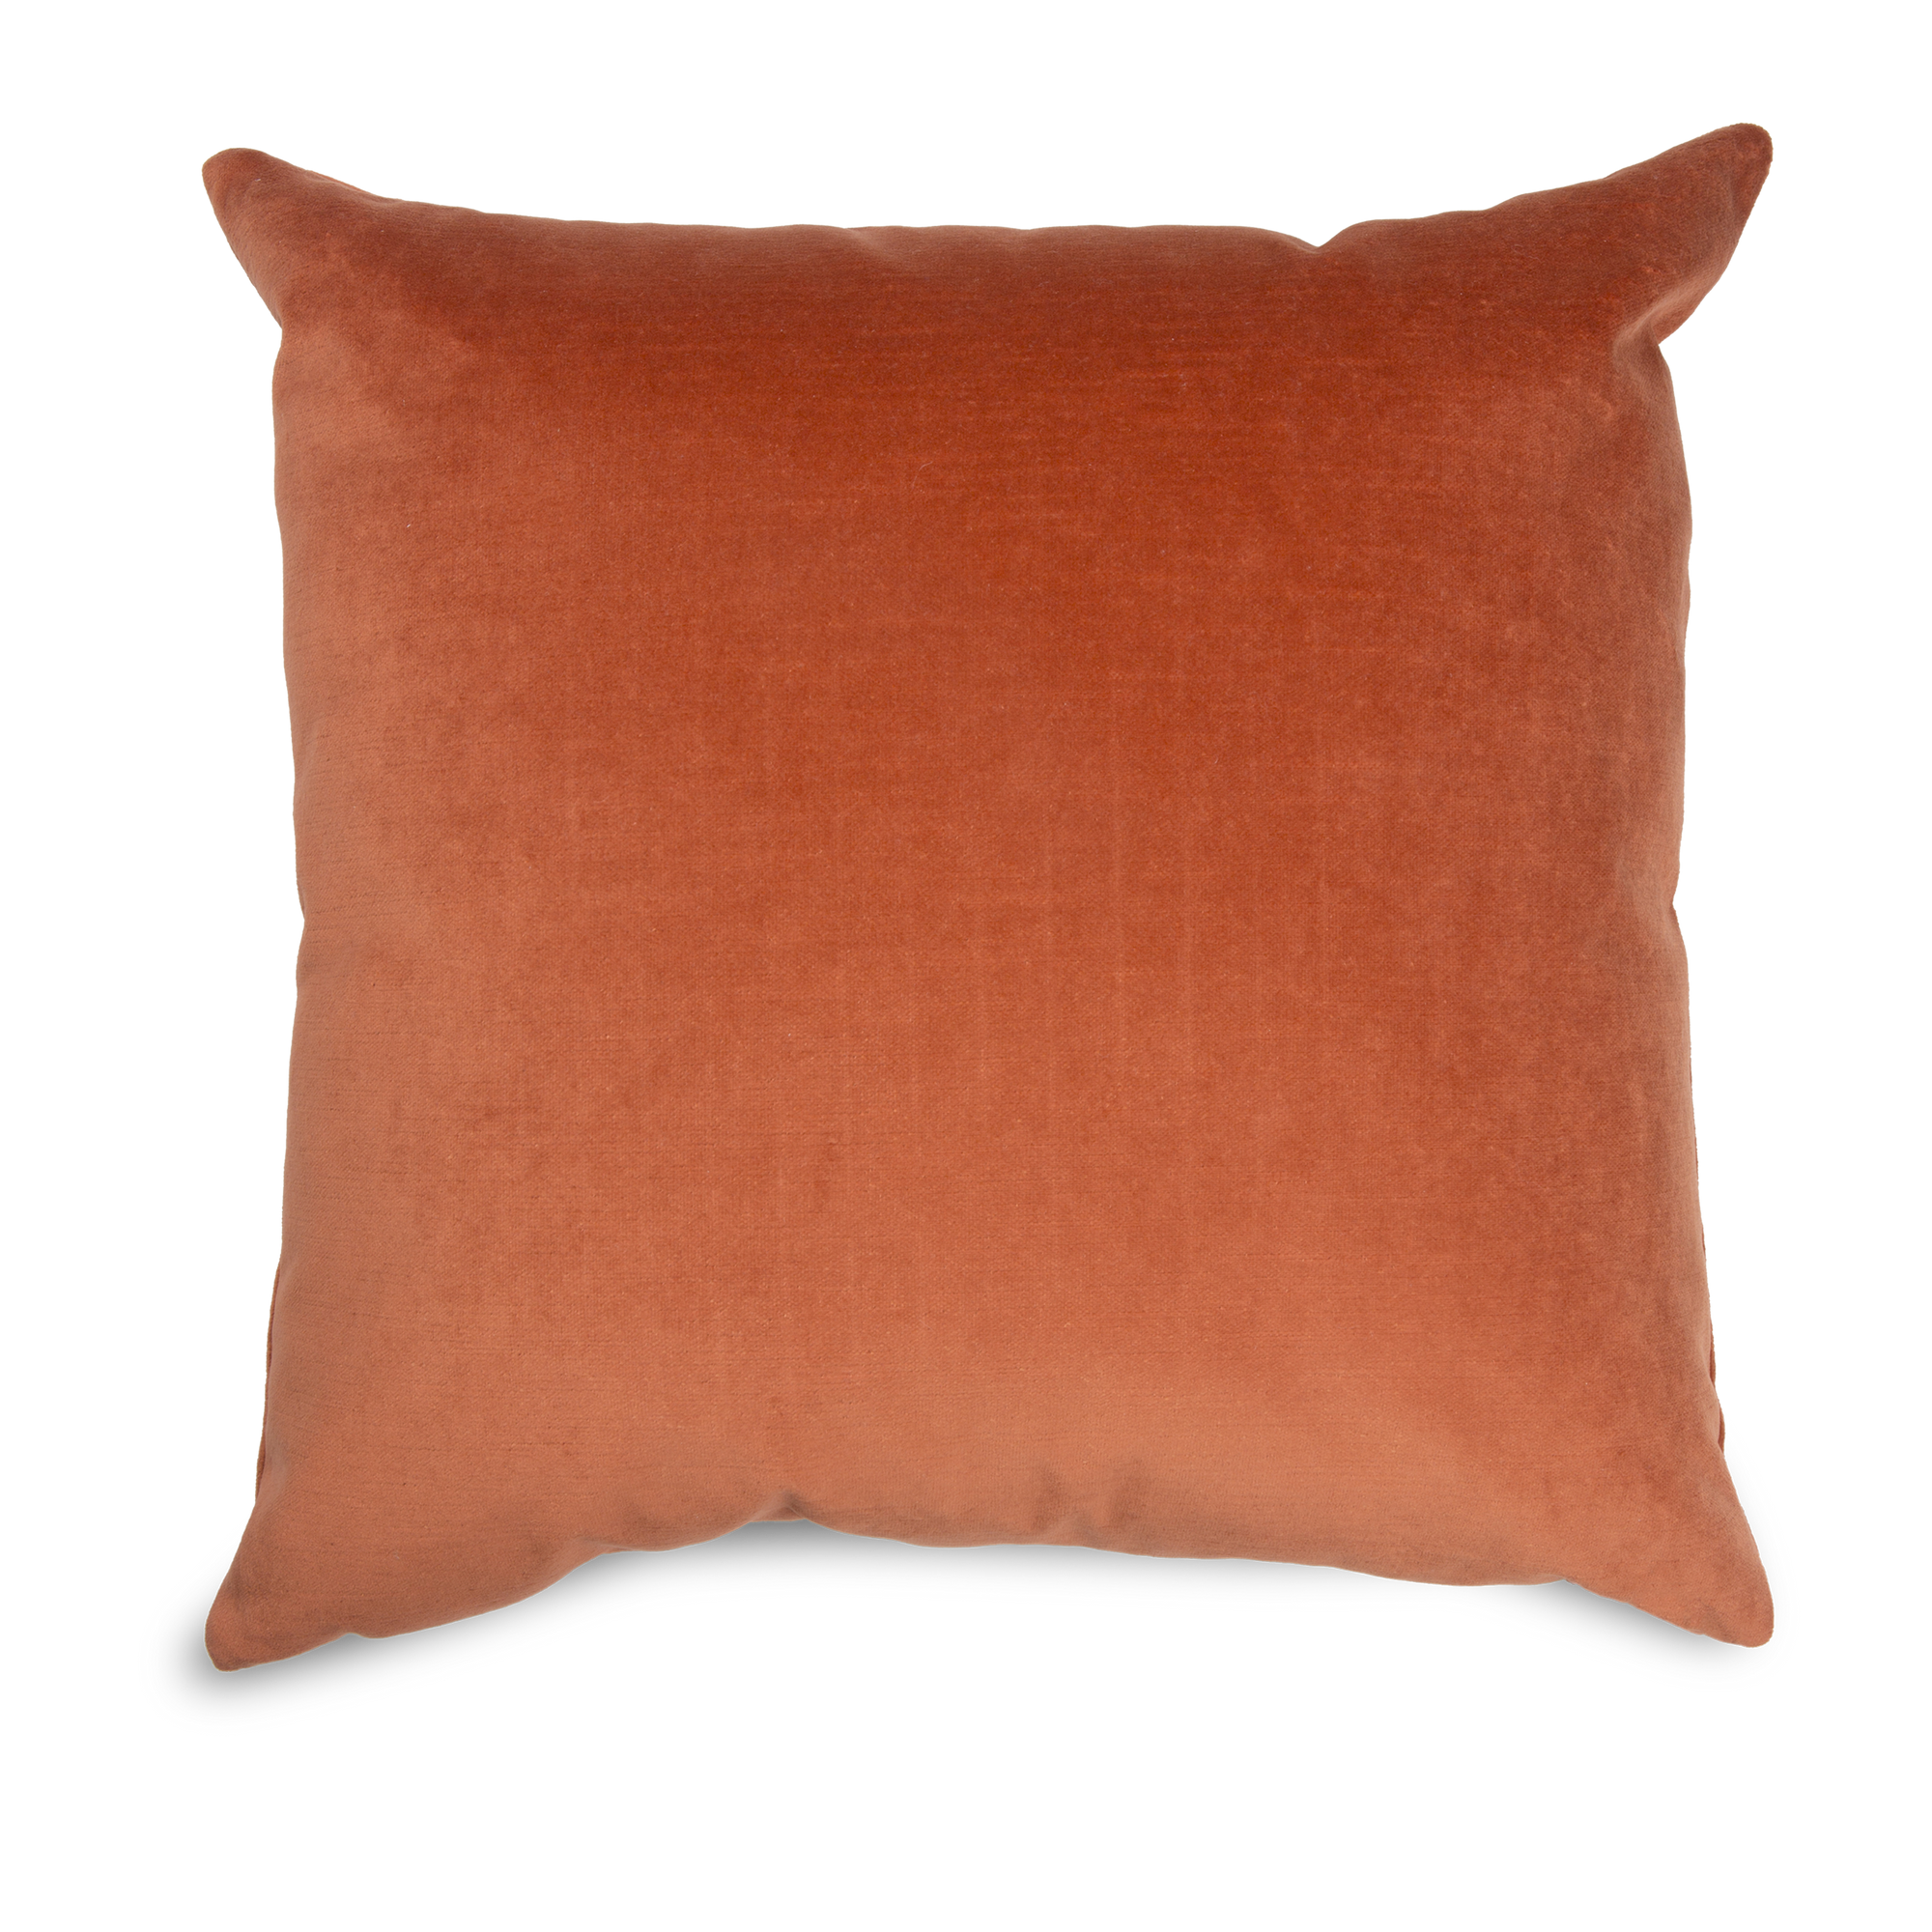 Defined by its textural appeal, the Solid Velvet Pillow is recognized for its luxurious velvet texture and its pleasant solid colour.